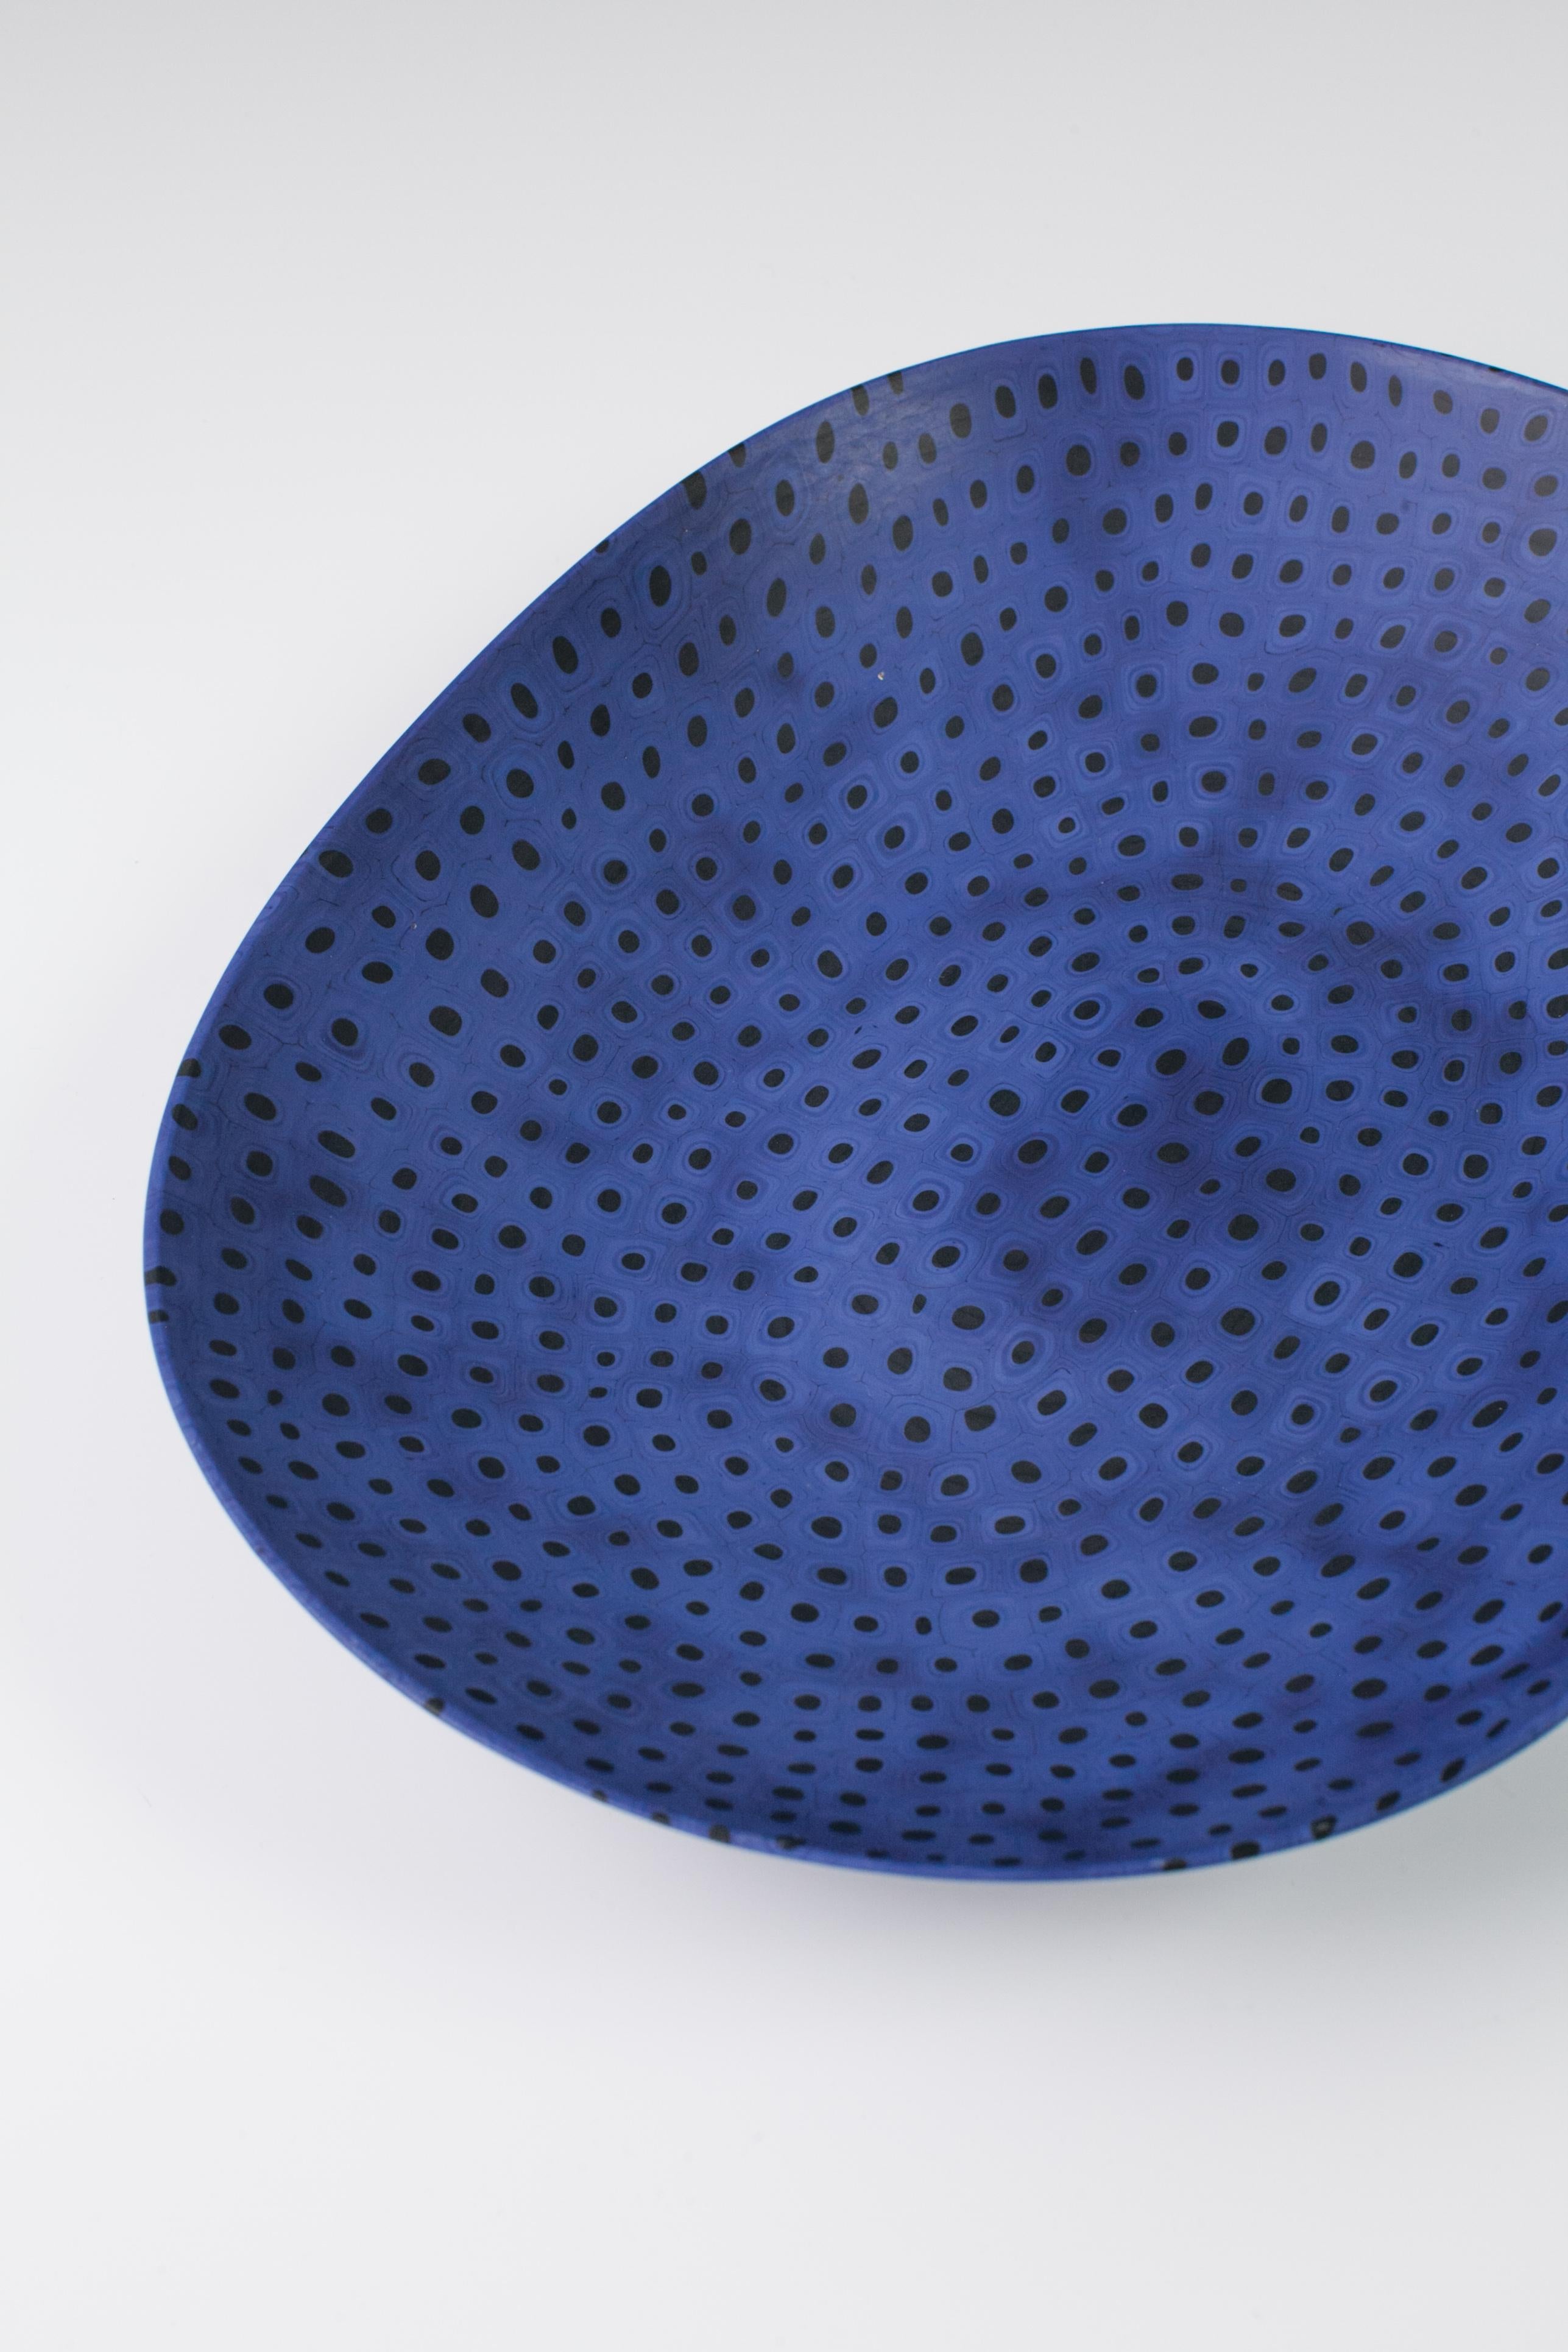 Black and blue plate designed by Carlo Scarpa made with the 